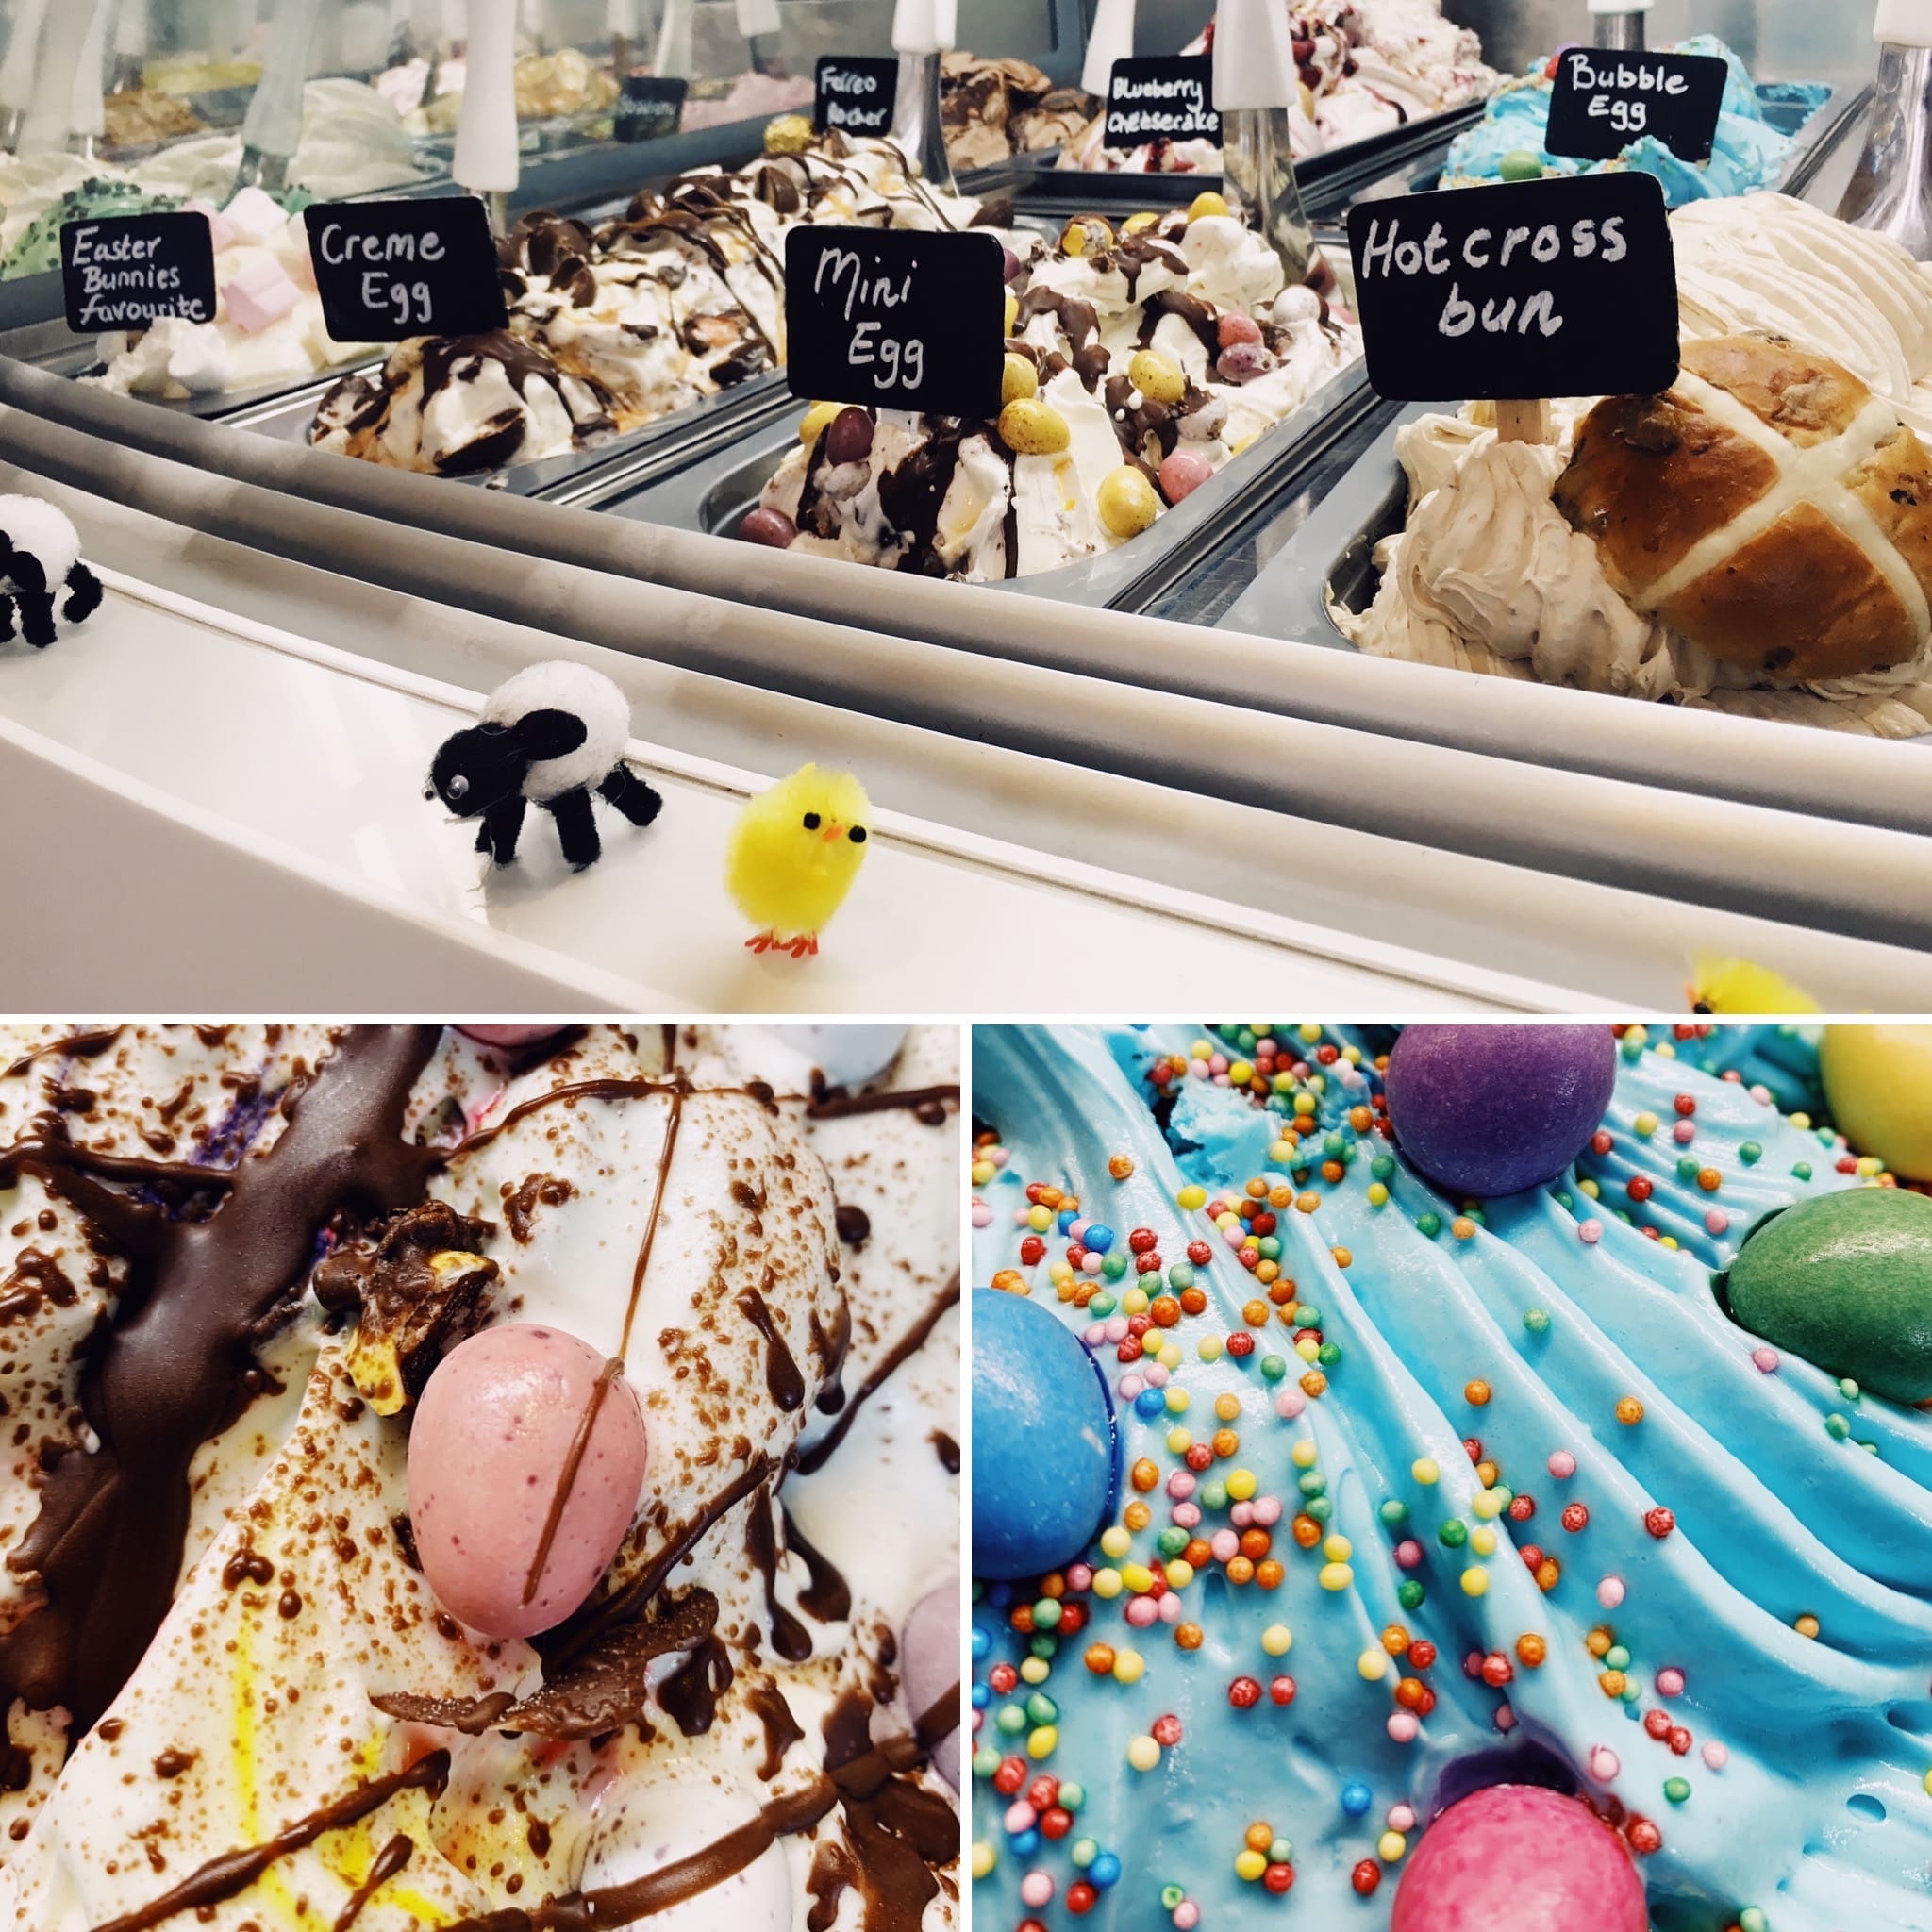 Hooray's easter flavours and close ups of mini egg and blue egg gelato